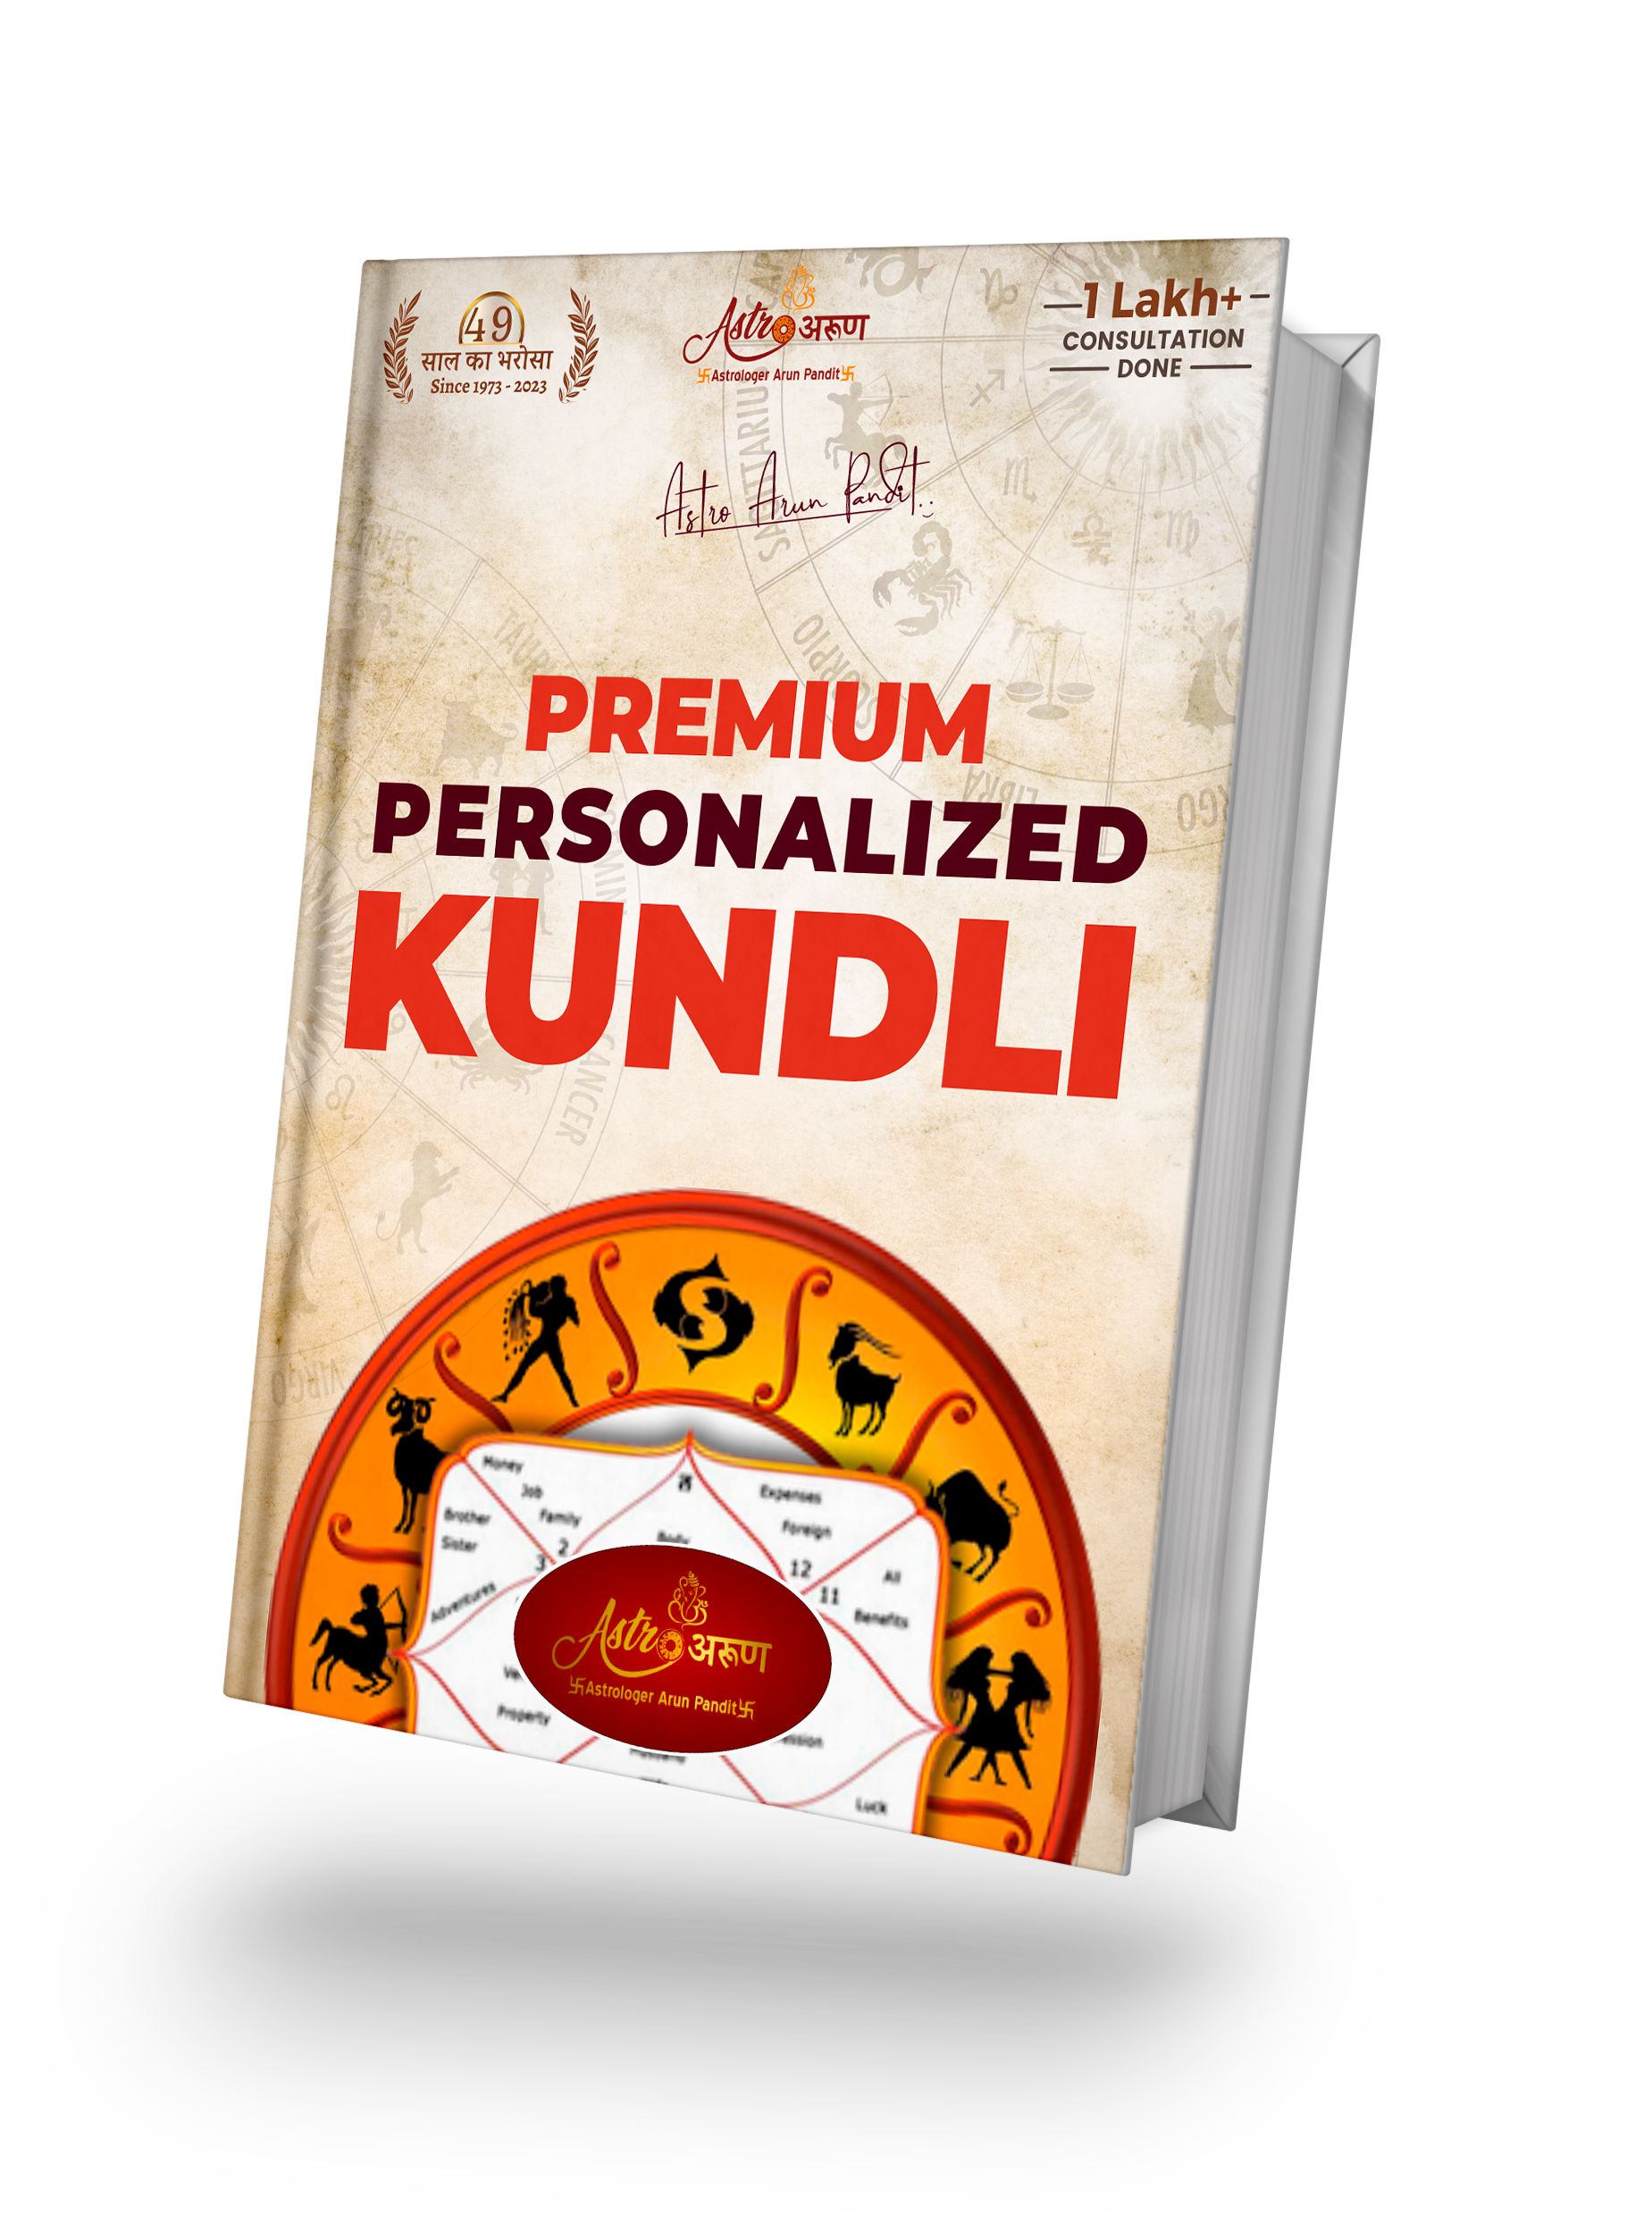 premium personalized kundali by astro arun pandit best gold medalist and certified astrologer in india